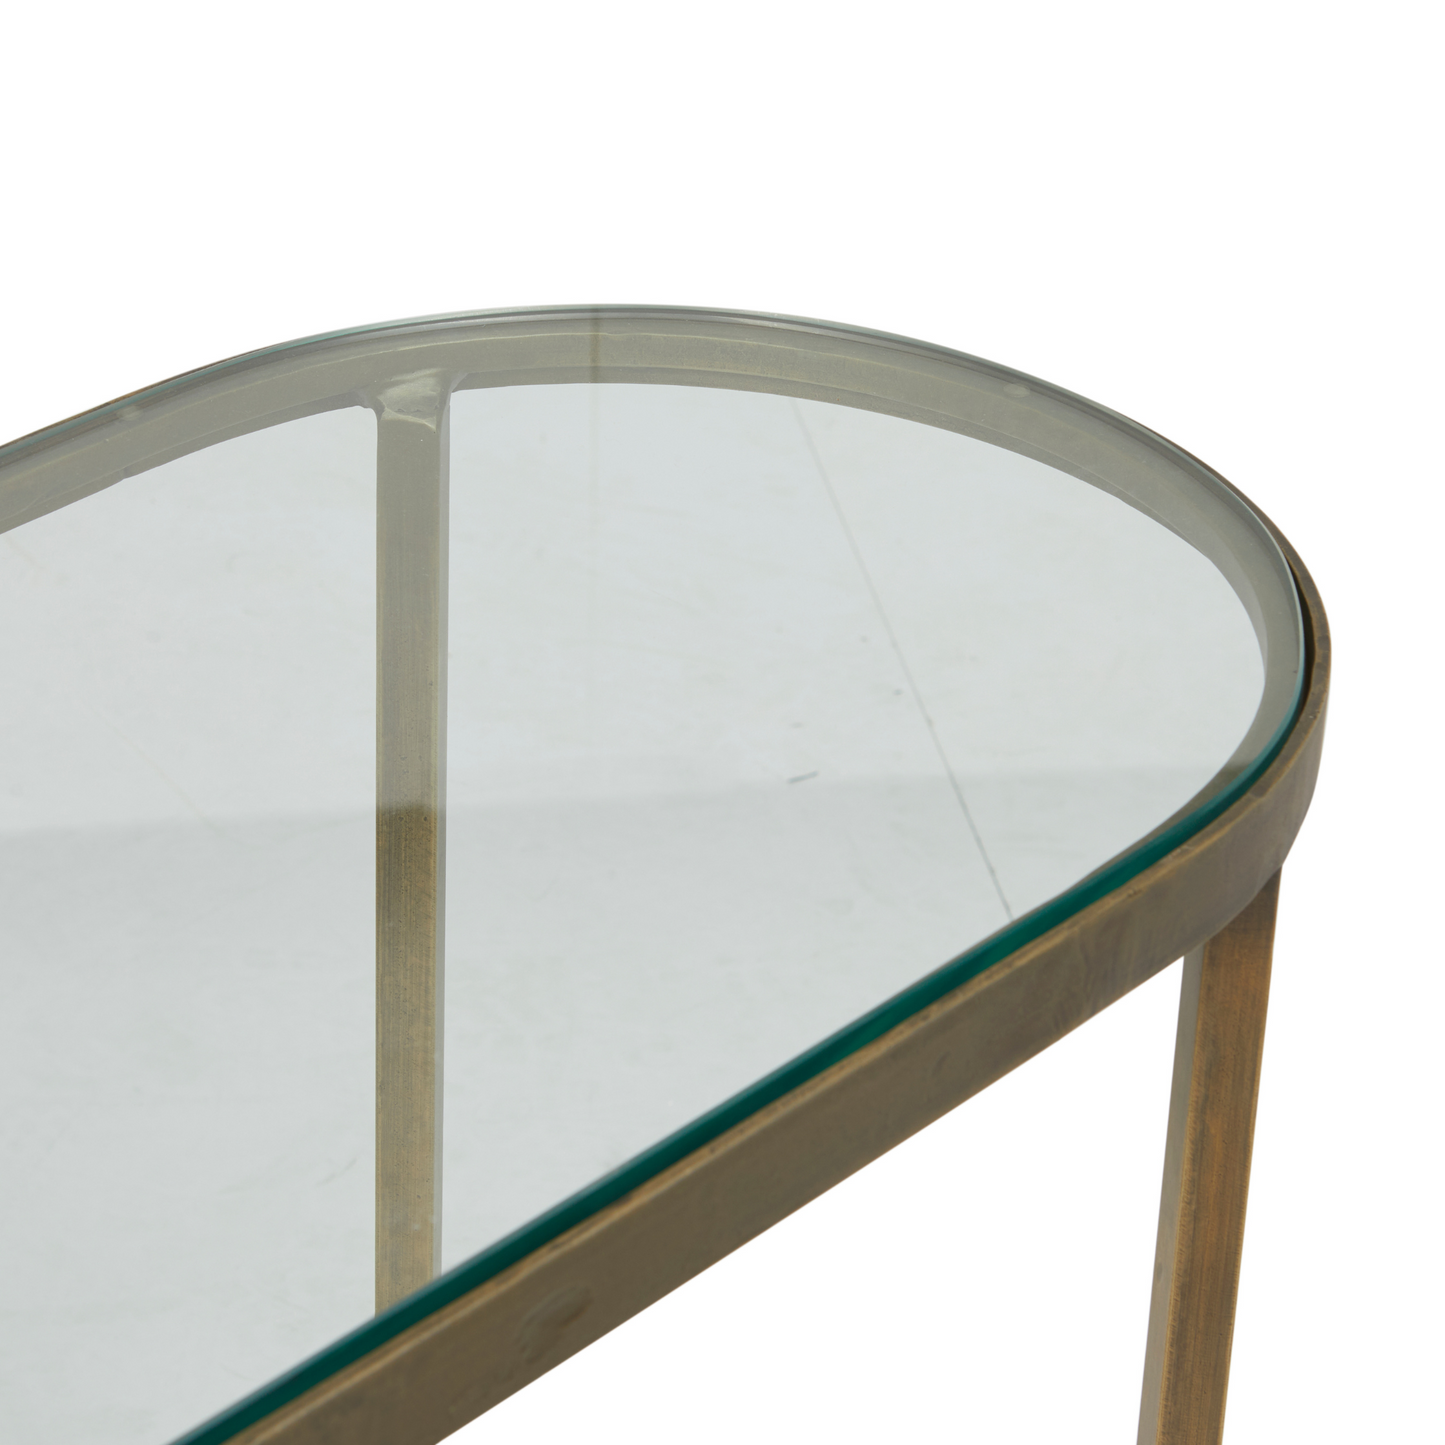 Amelie Curve Console Table by Globewest